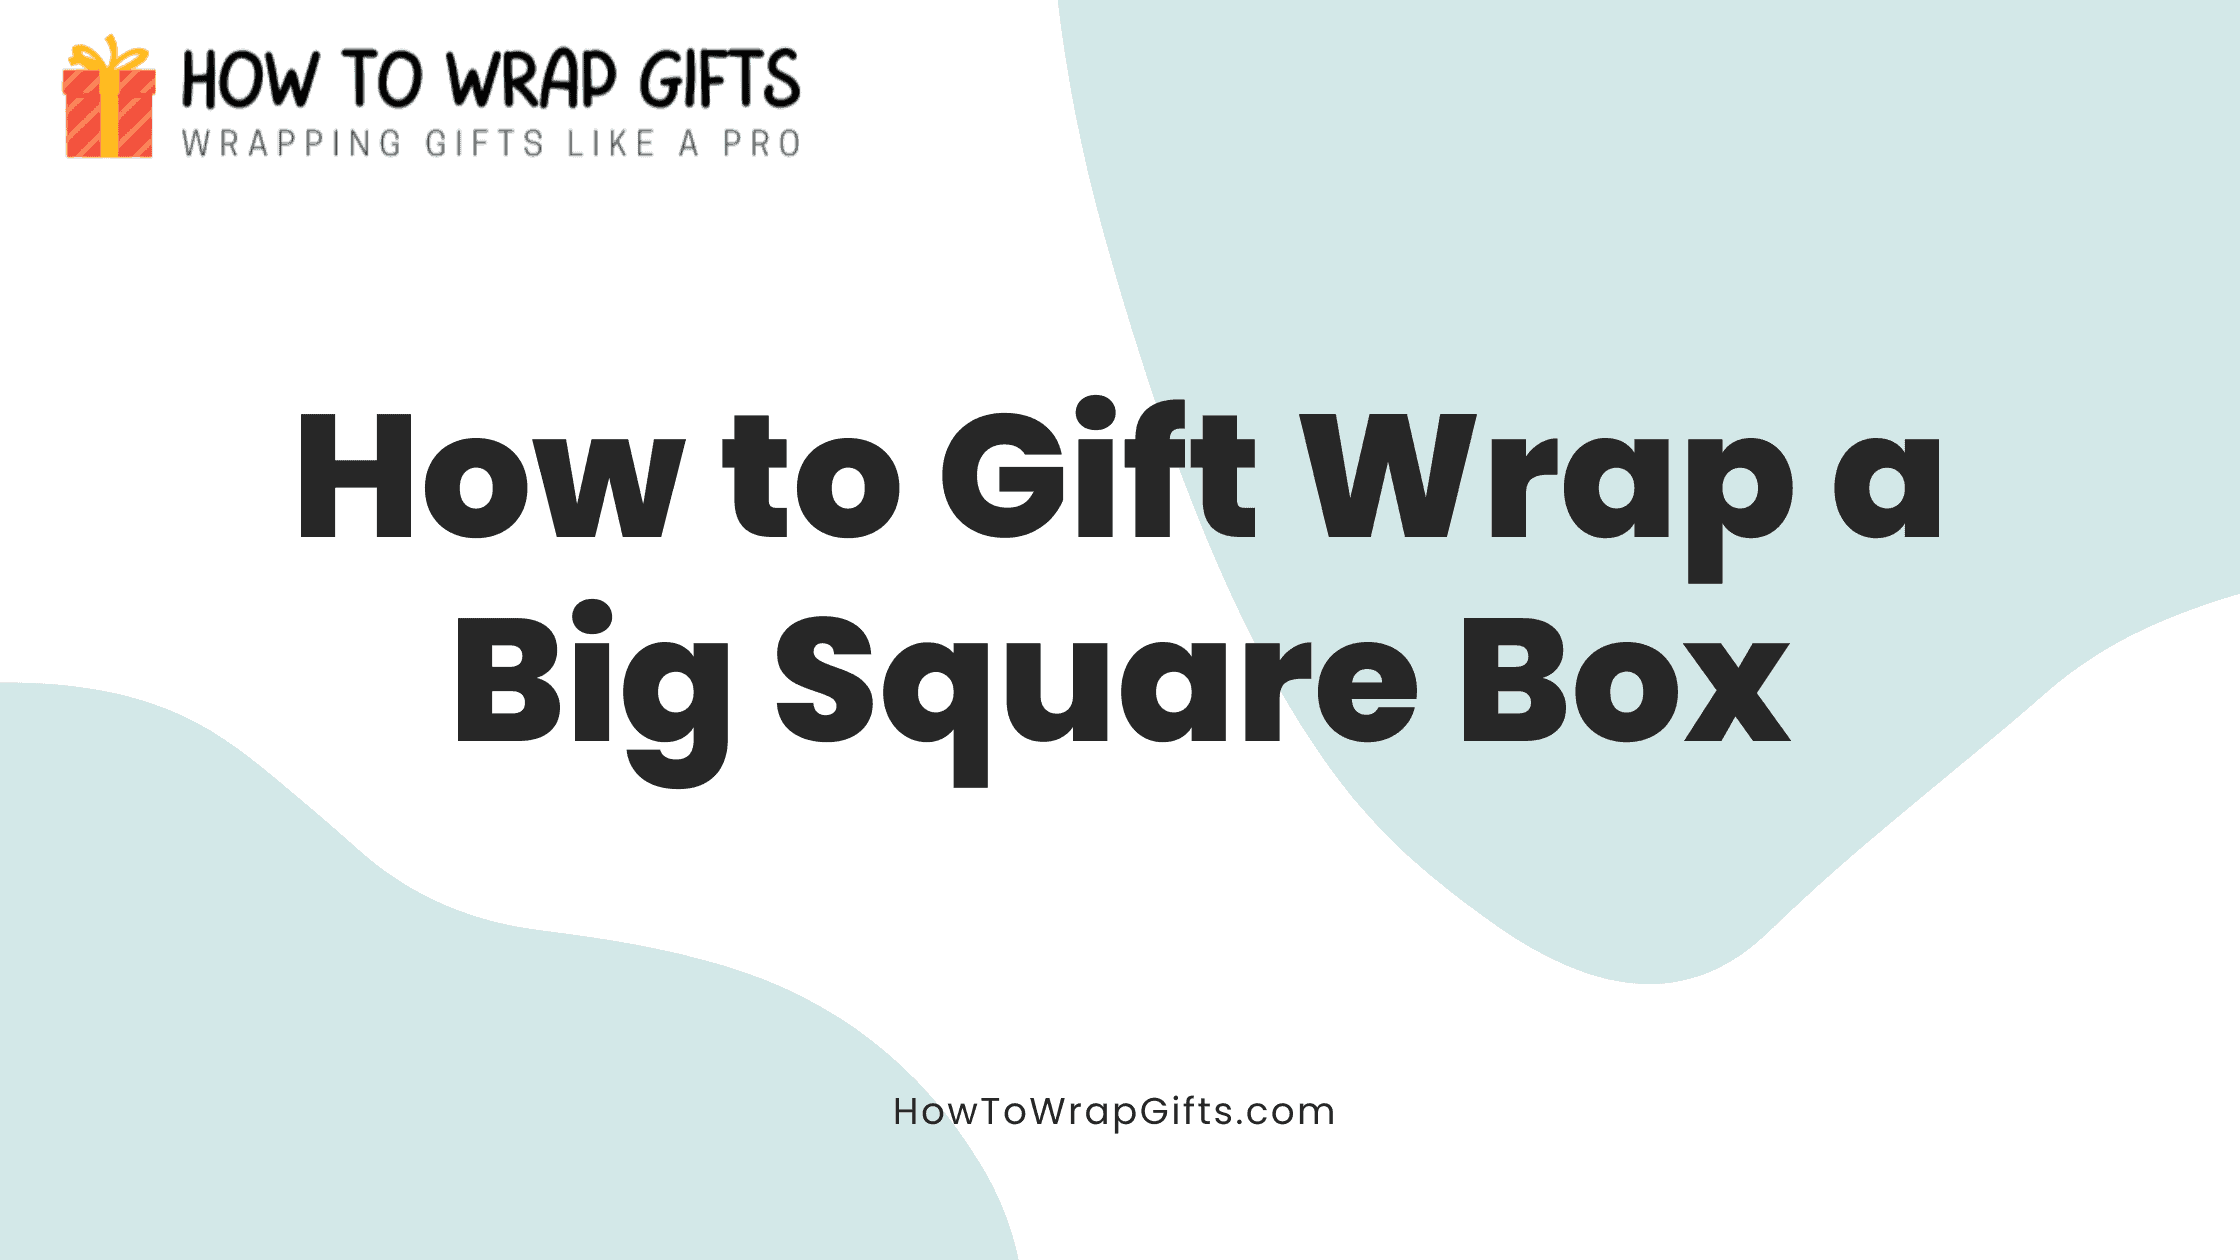 How to Gift Wrap a Big Square Box